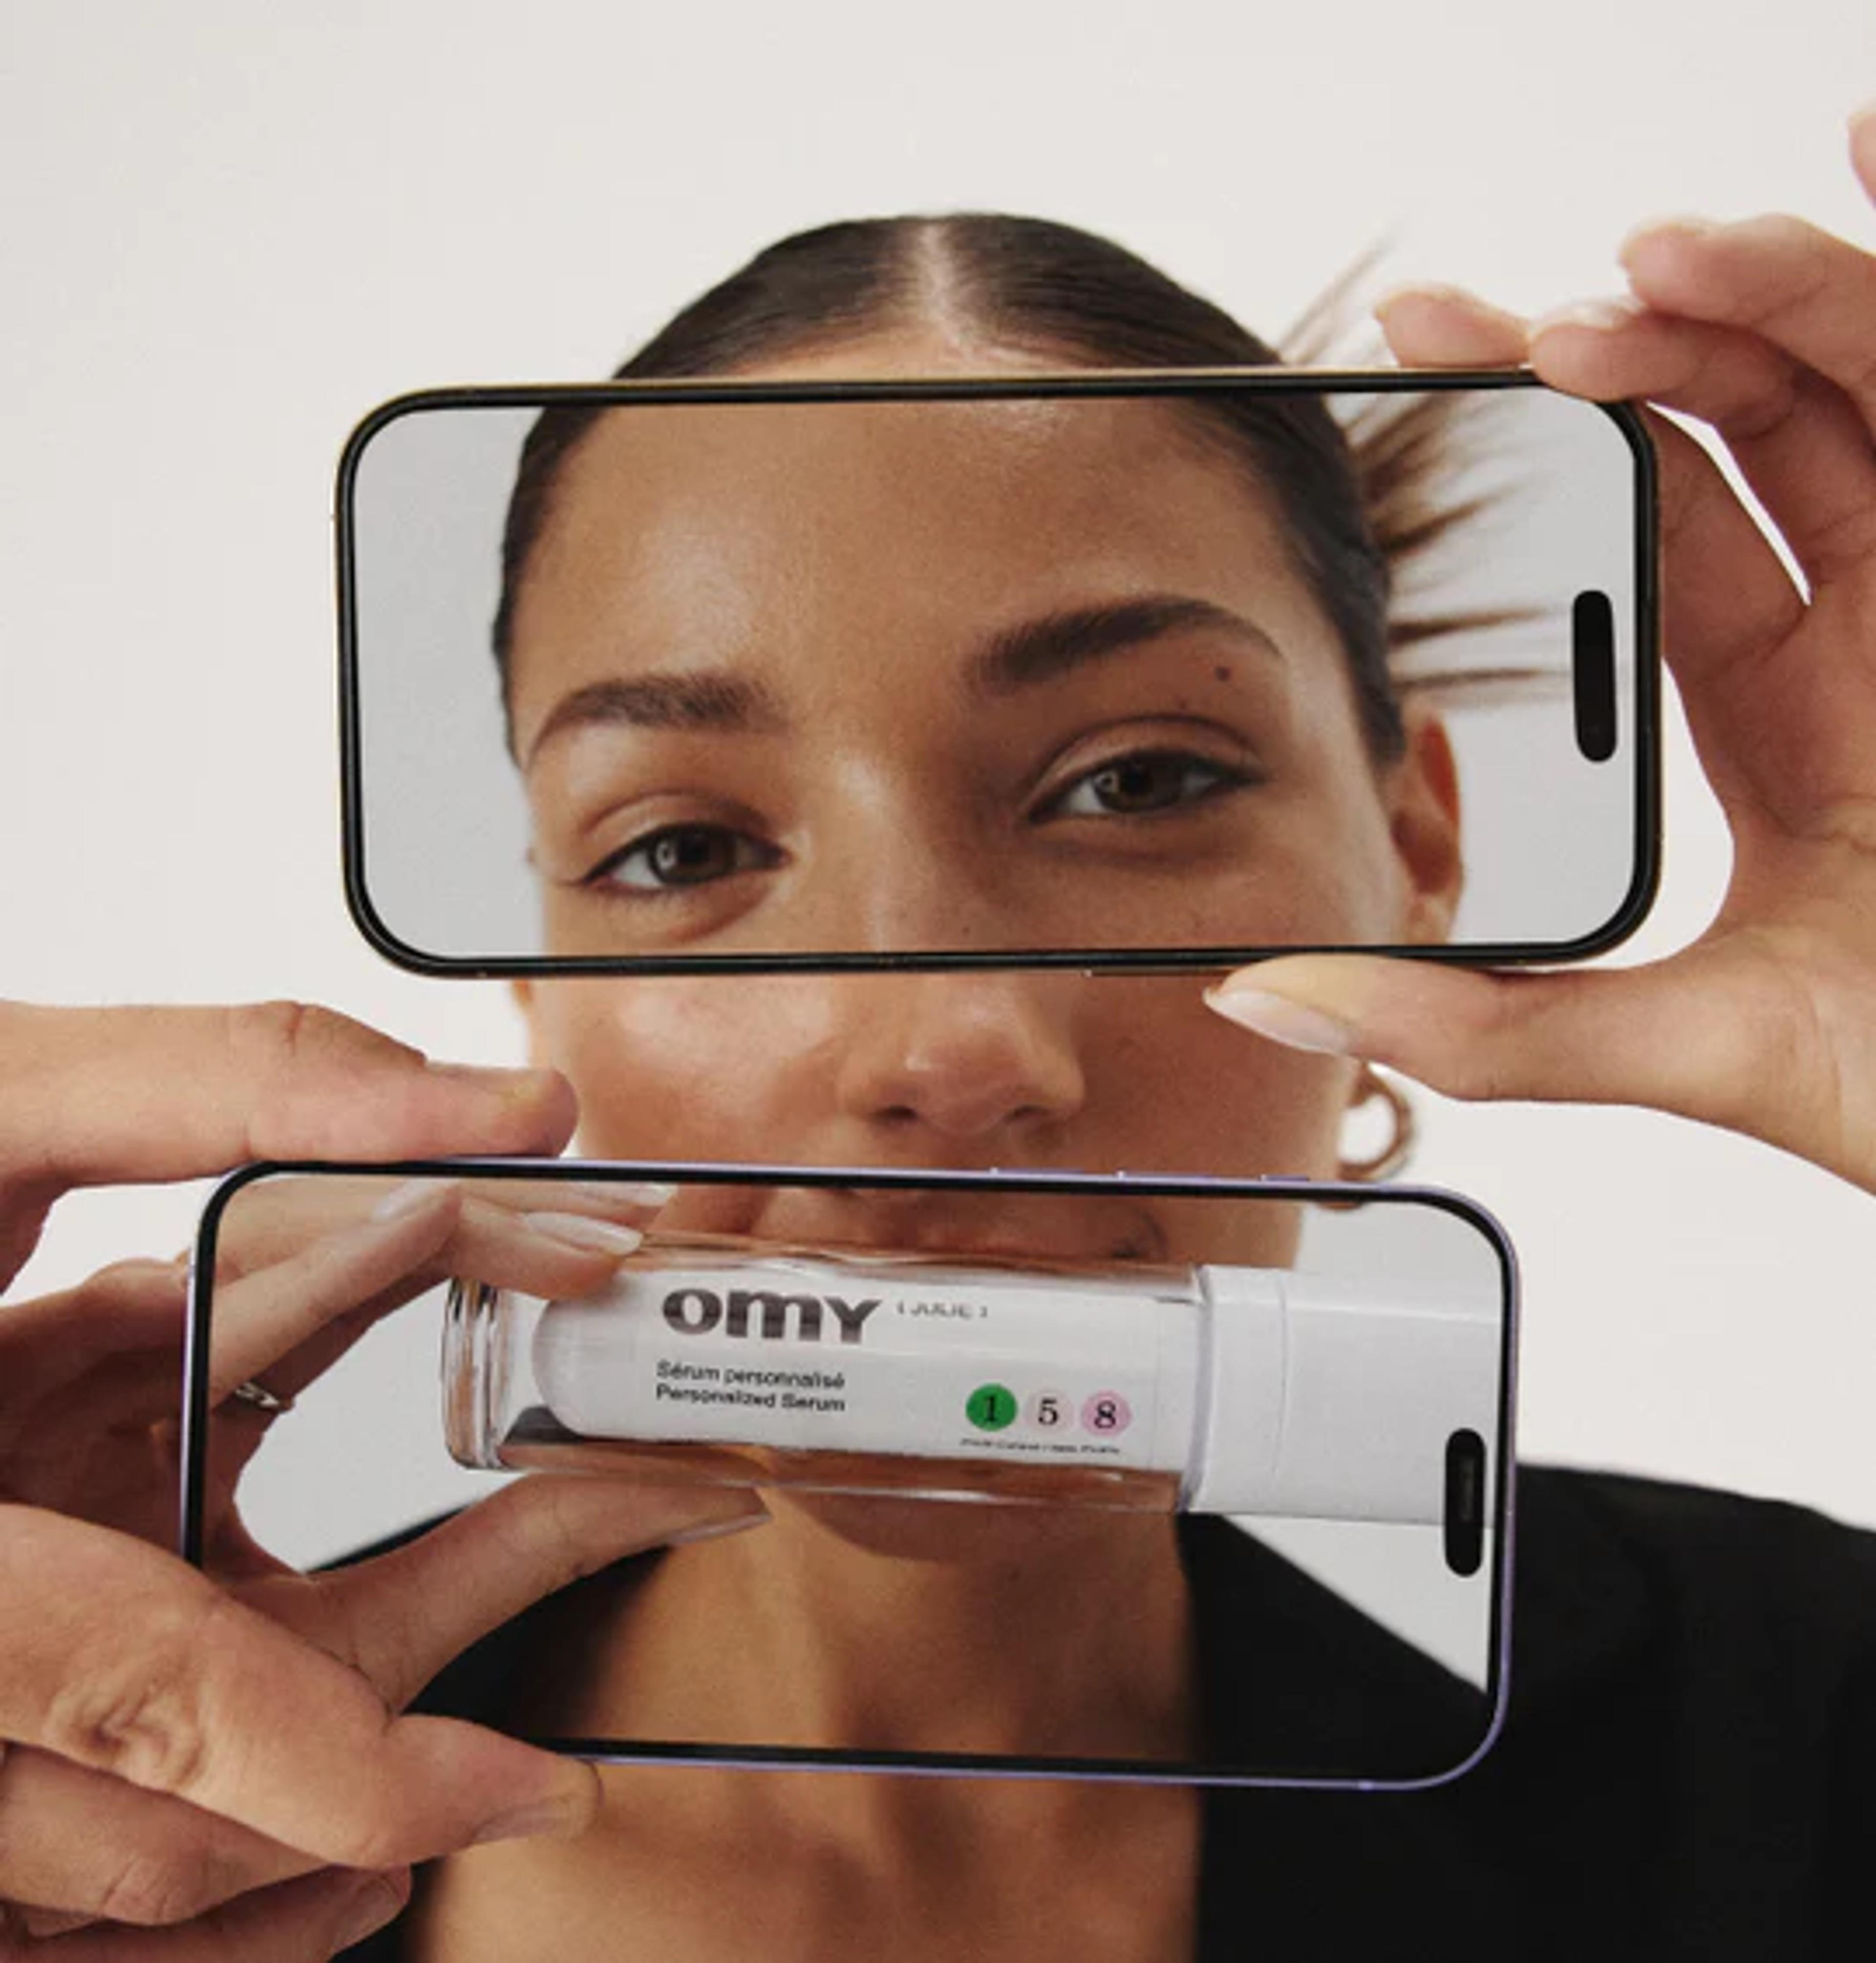 a woman is holding a cell phone in front of her face and a bottle of omy serum